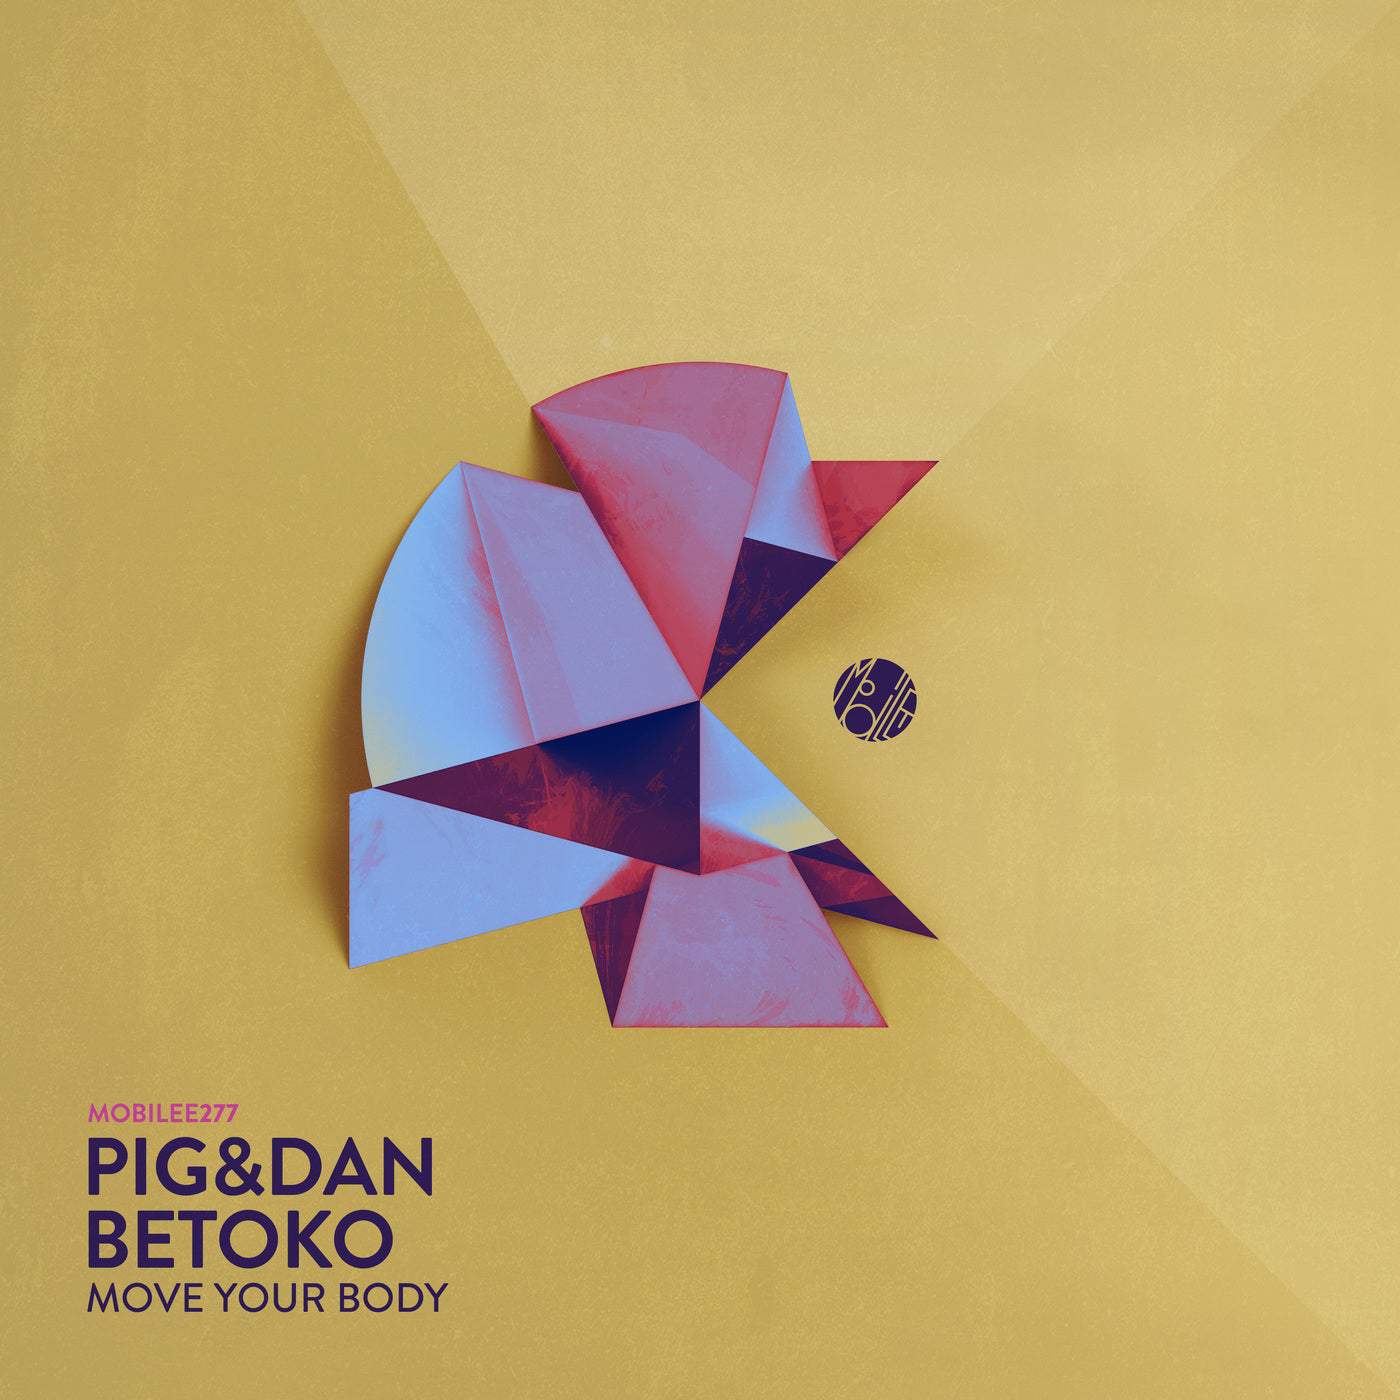 Release Cover: Pig&Dan, Betoko - Move Your Body on Electrobuzz